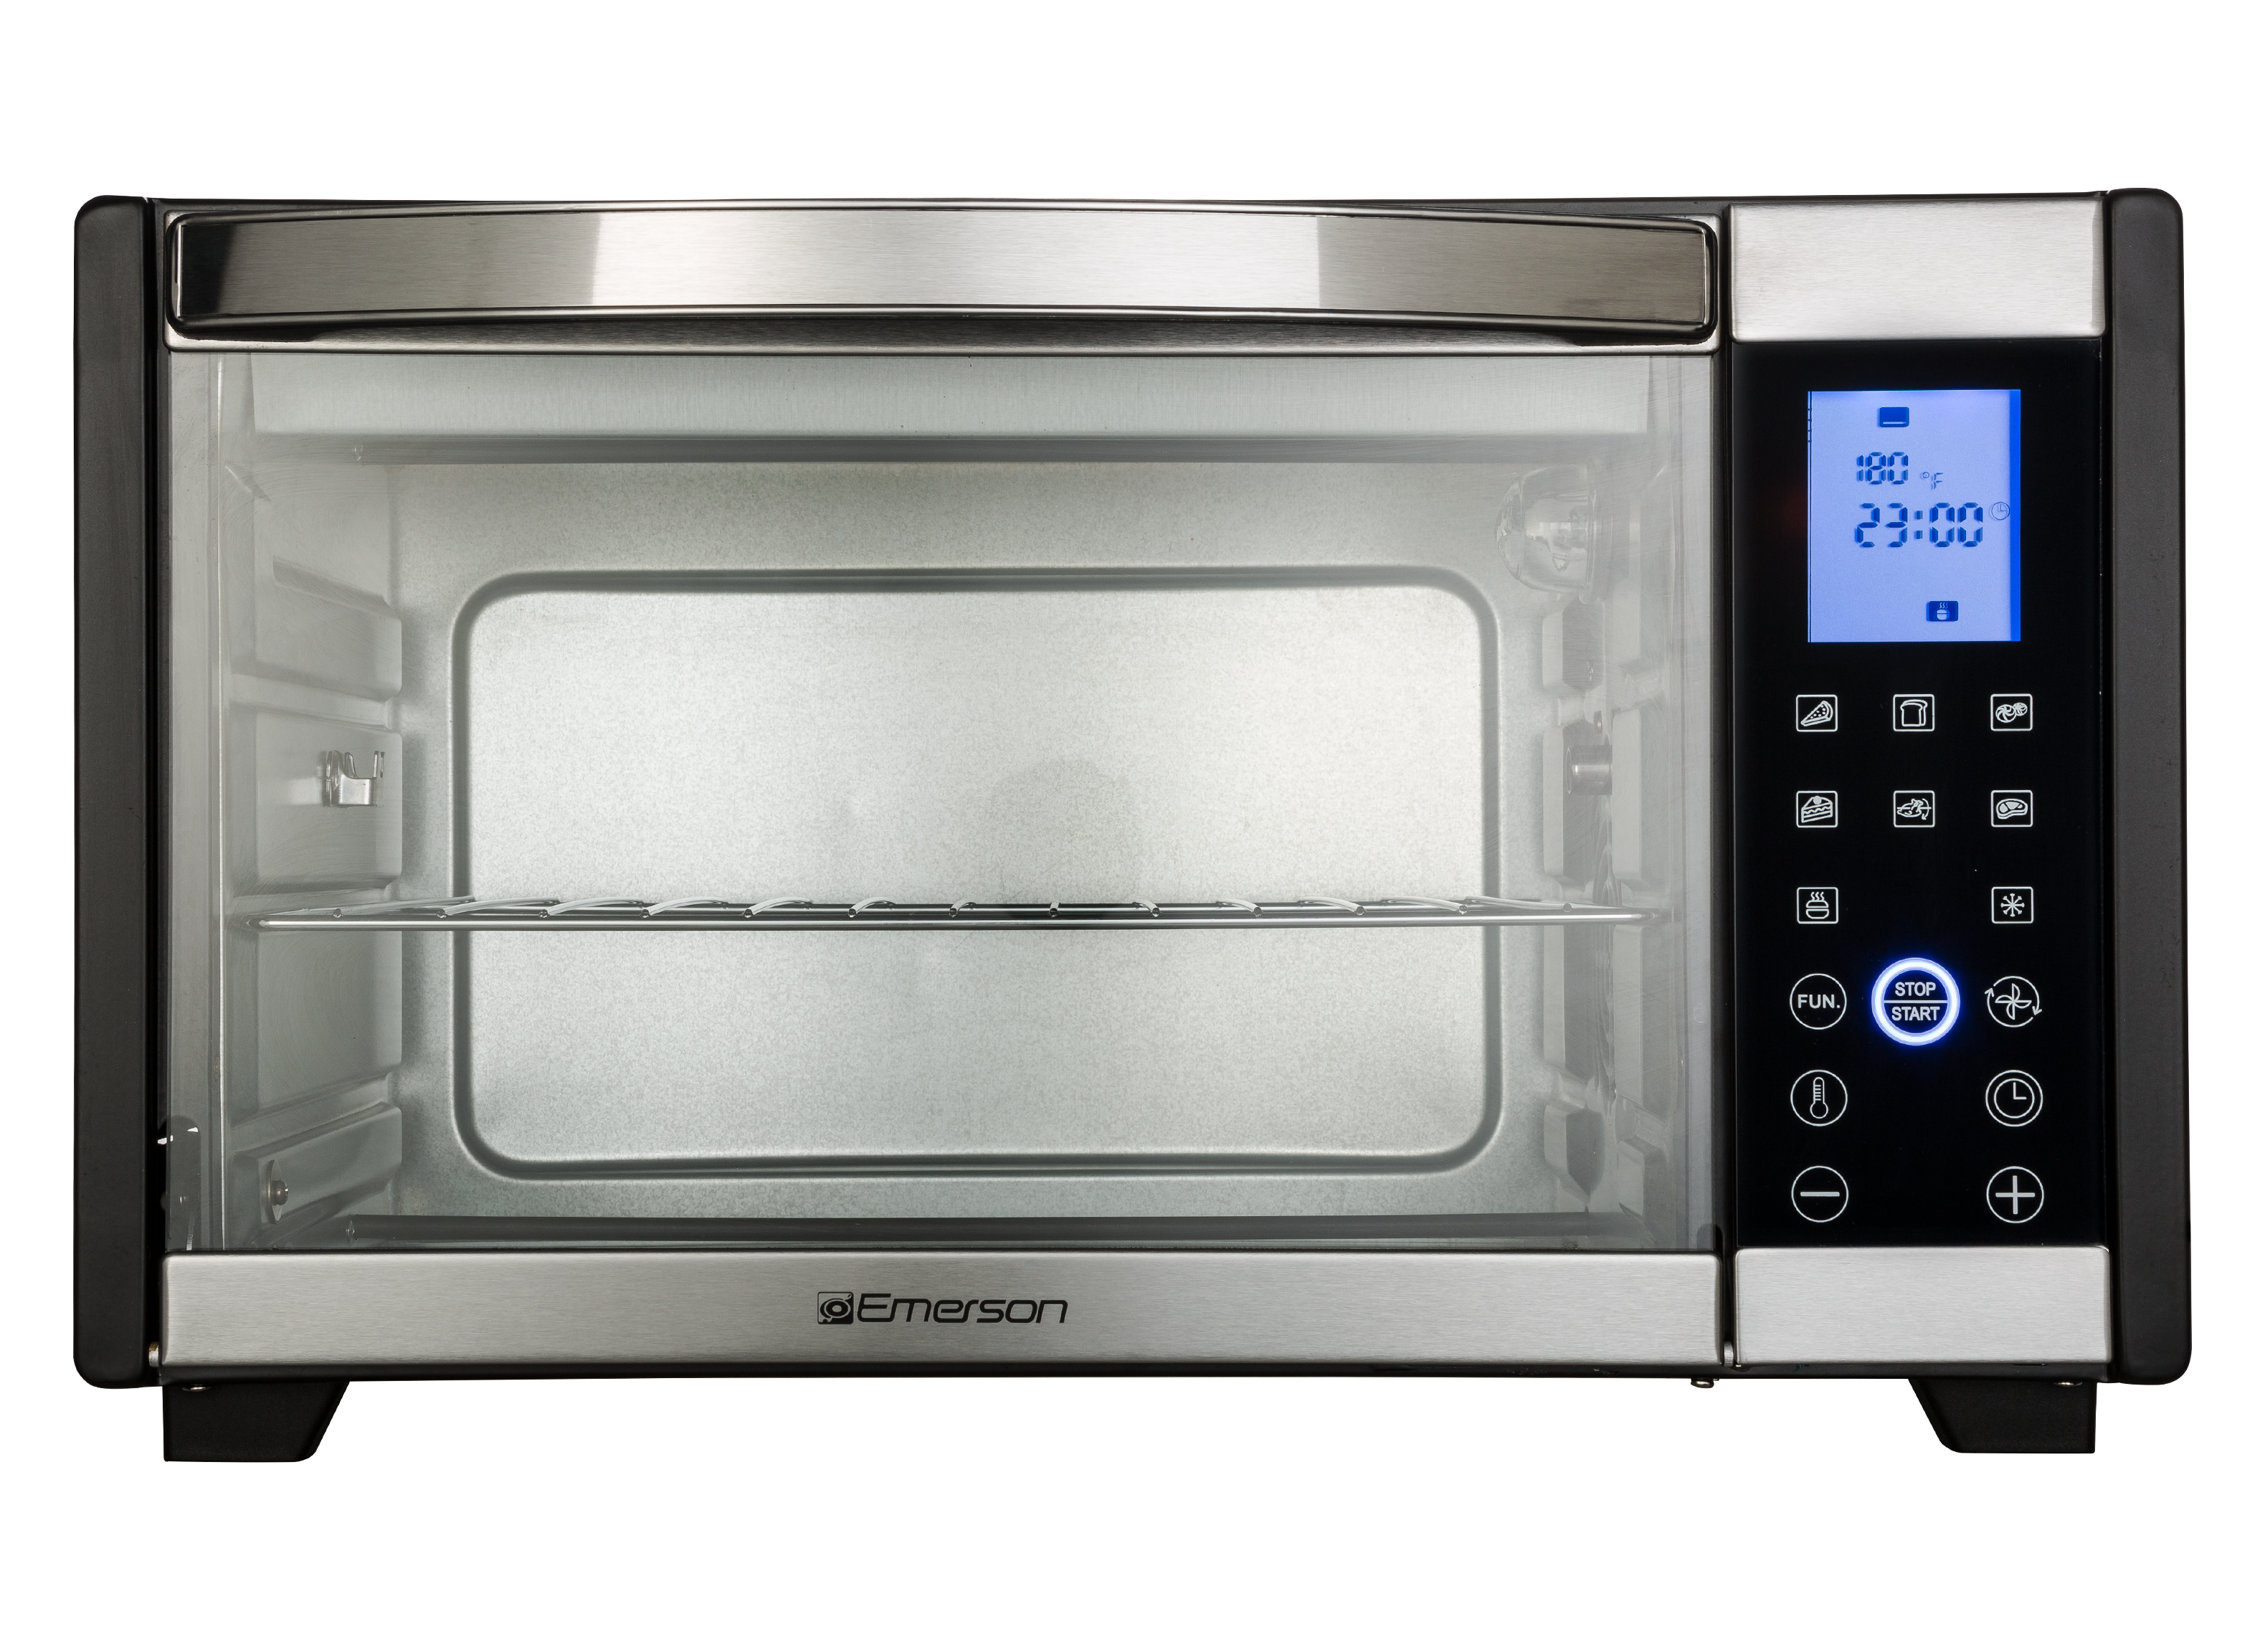 https://crdms.images.consumerreports.org/prod/products/cr/models/397412-toaster-ovens-emerson-6-slice-convection-rotisserie-101004-10002777.png